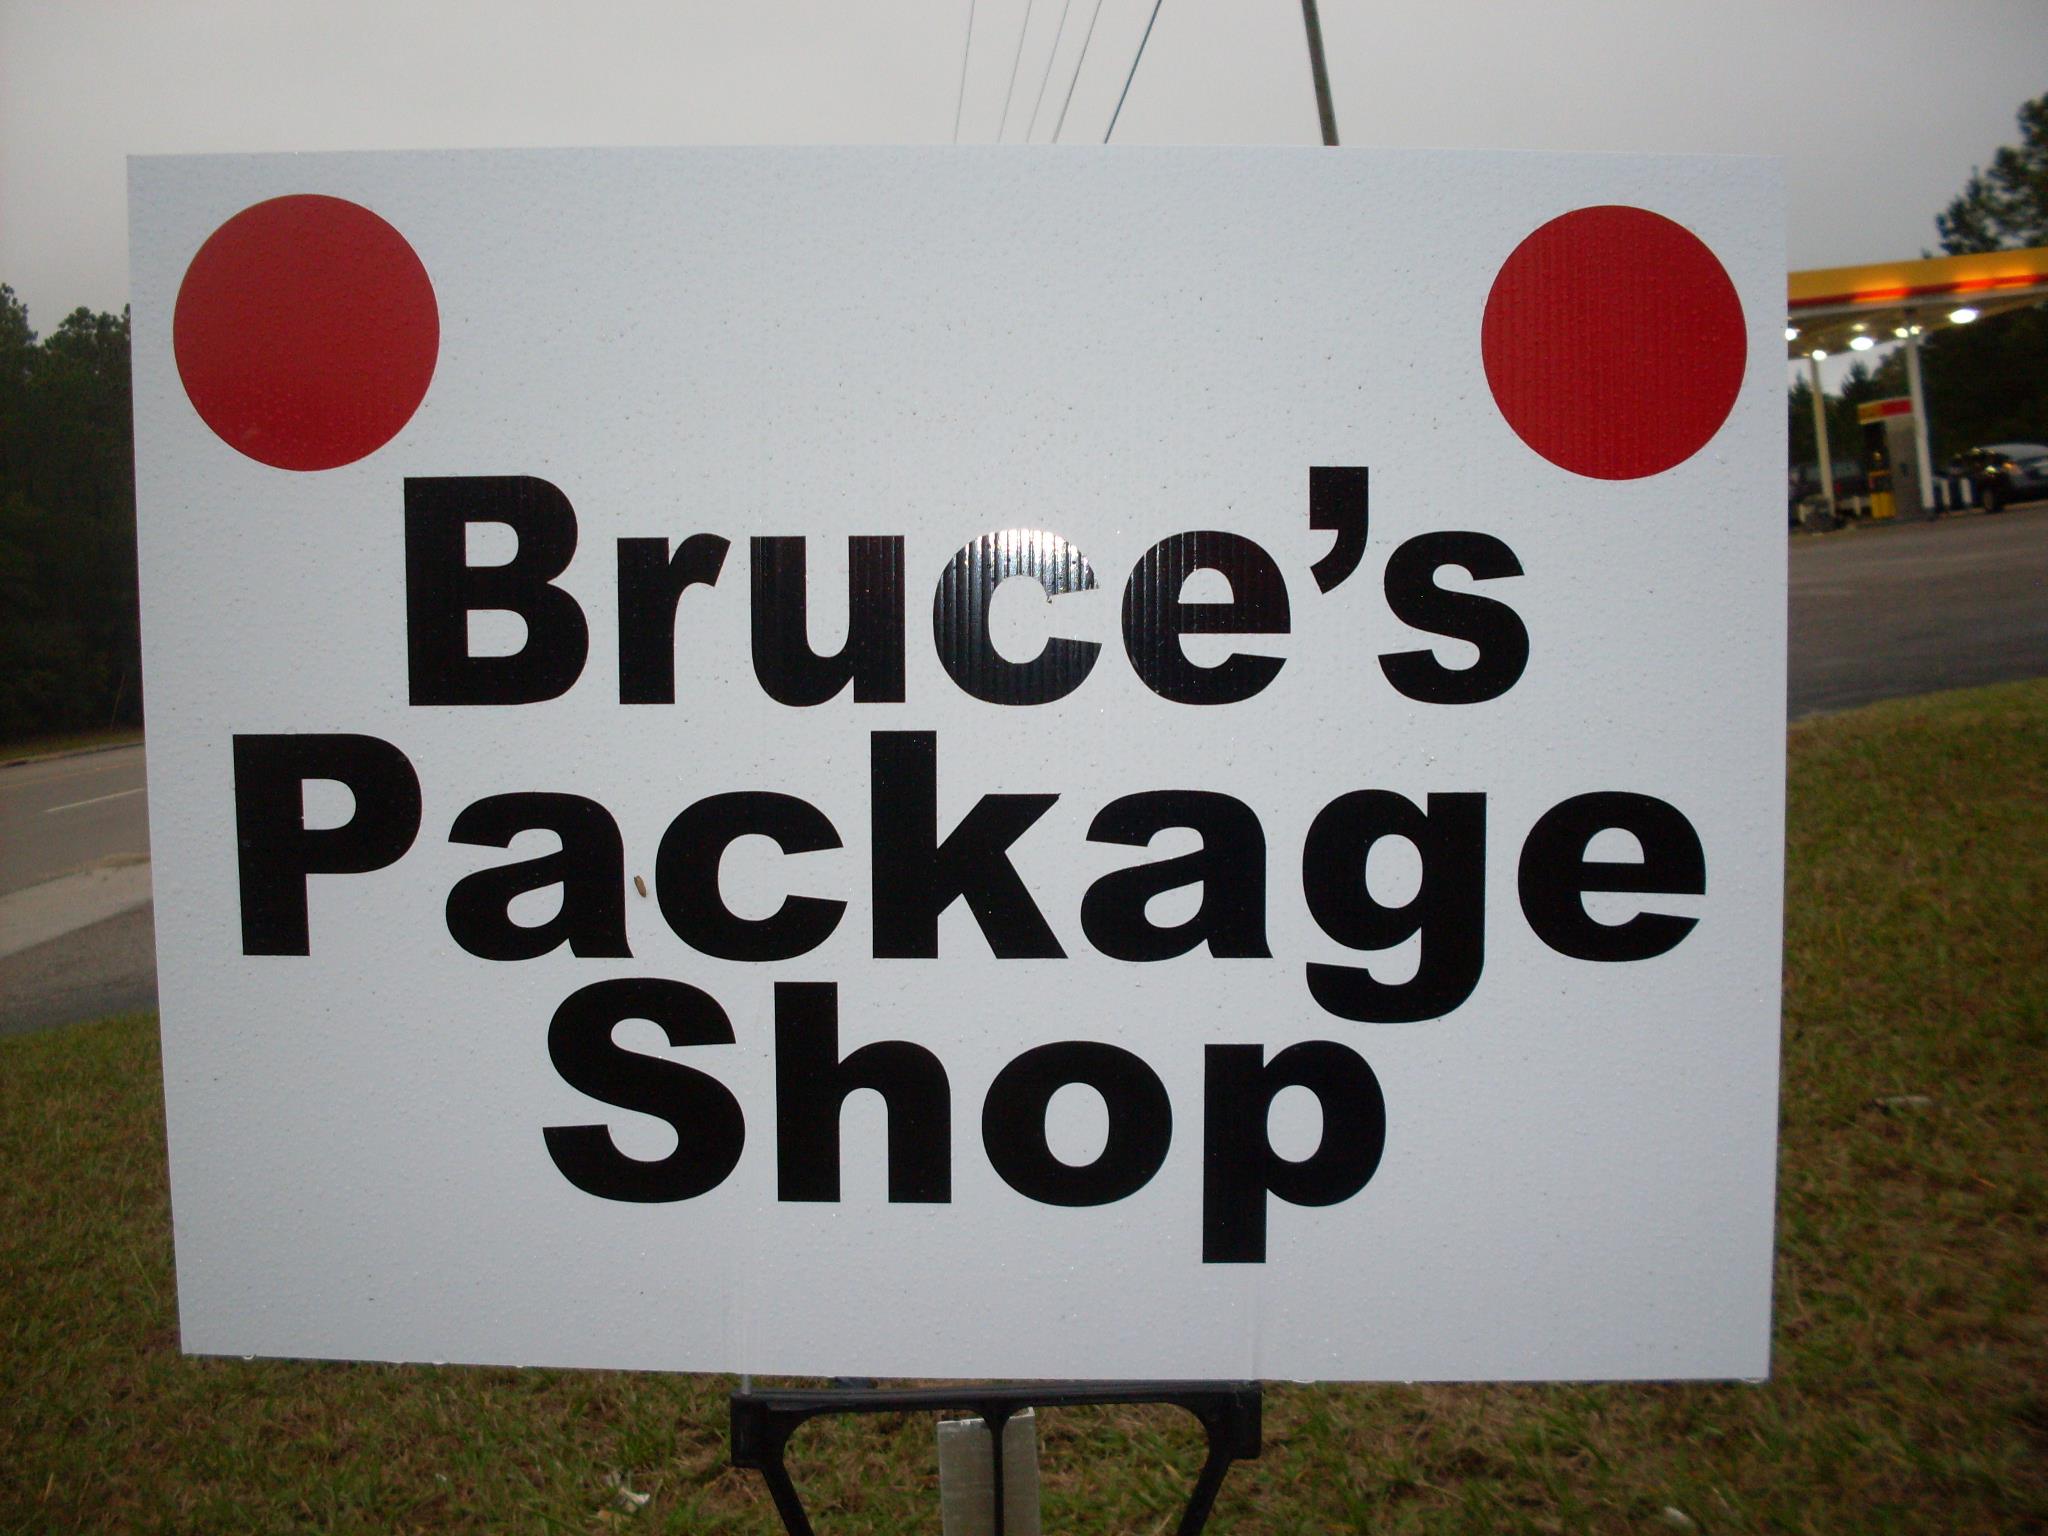 Bruce's Package Shop